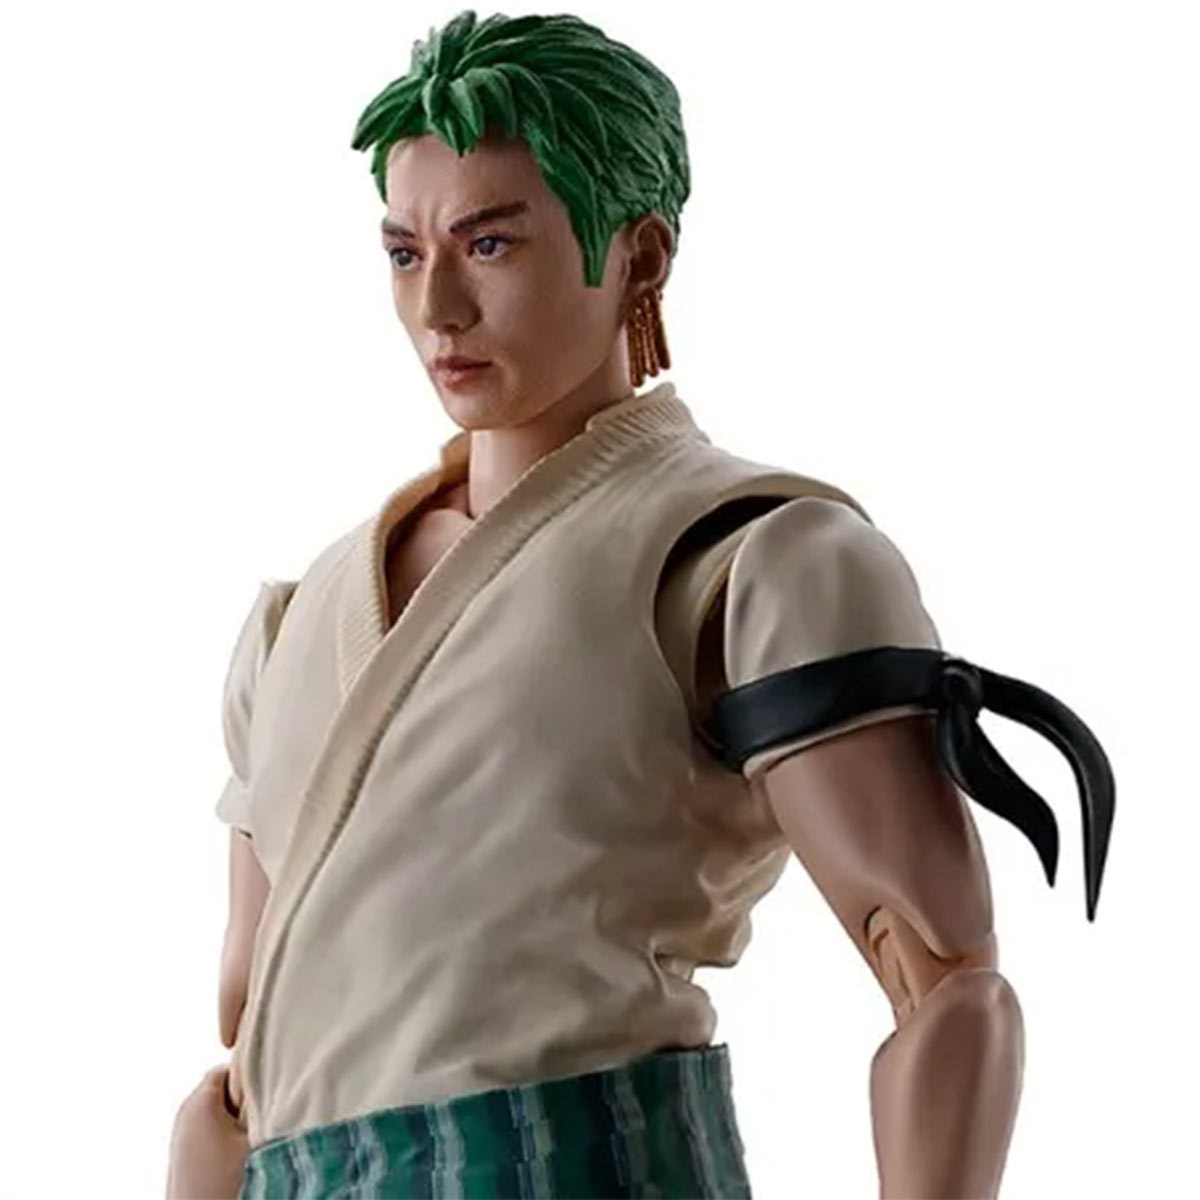 See the One Piece Live-Action Luffy and Zoro SH Figuarts Figures